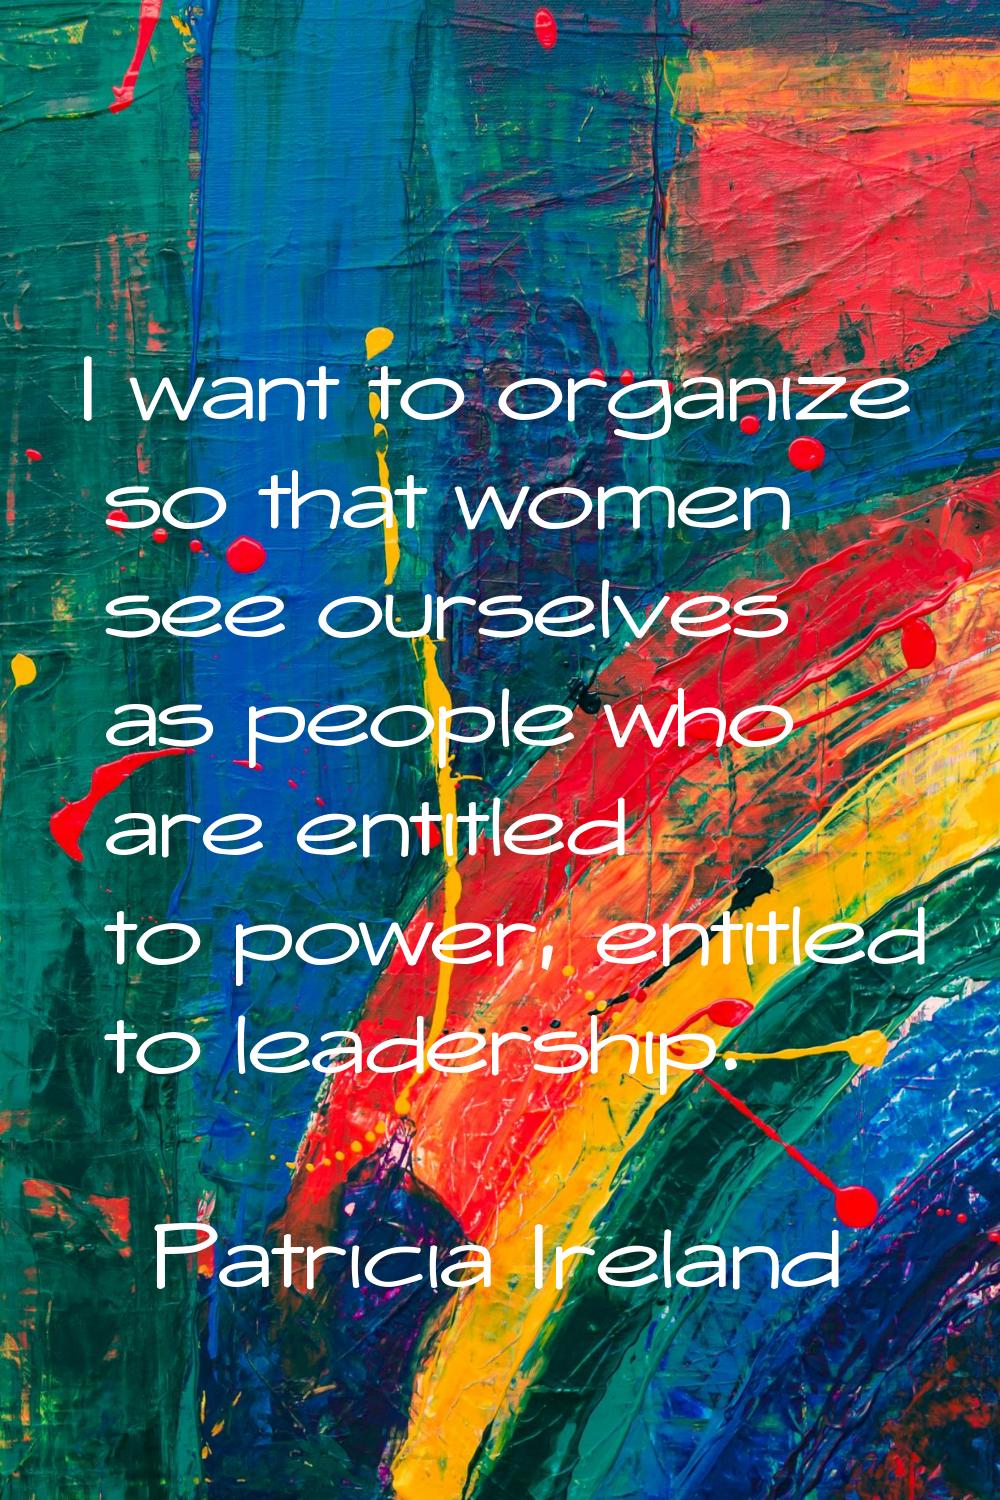 I want to organize so that women see ourselves as people who are entitled to power, entitled to lea